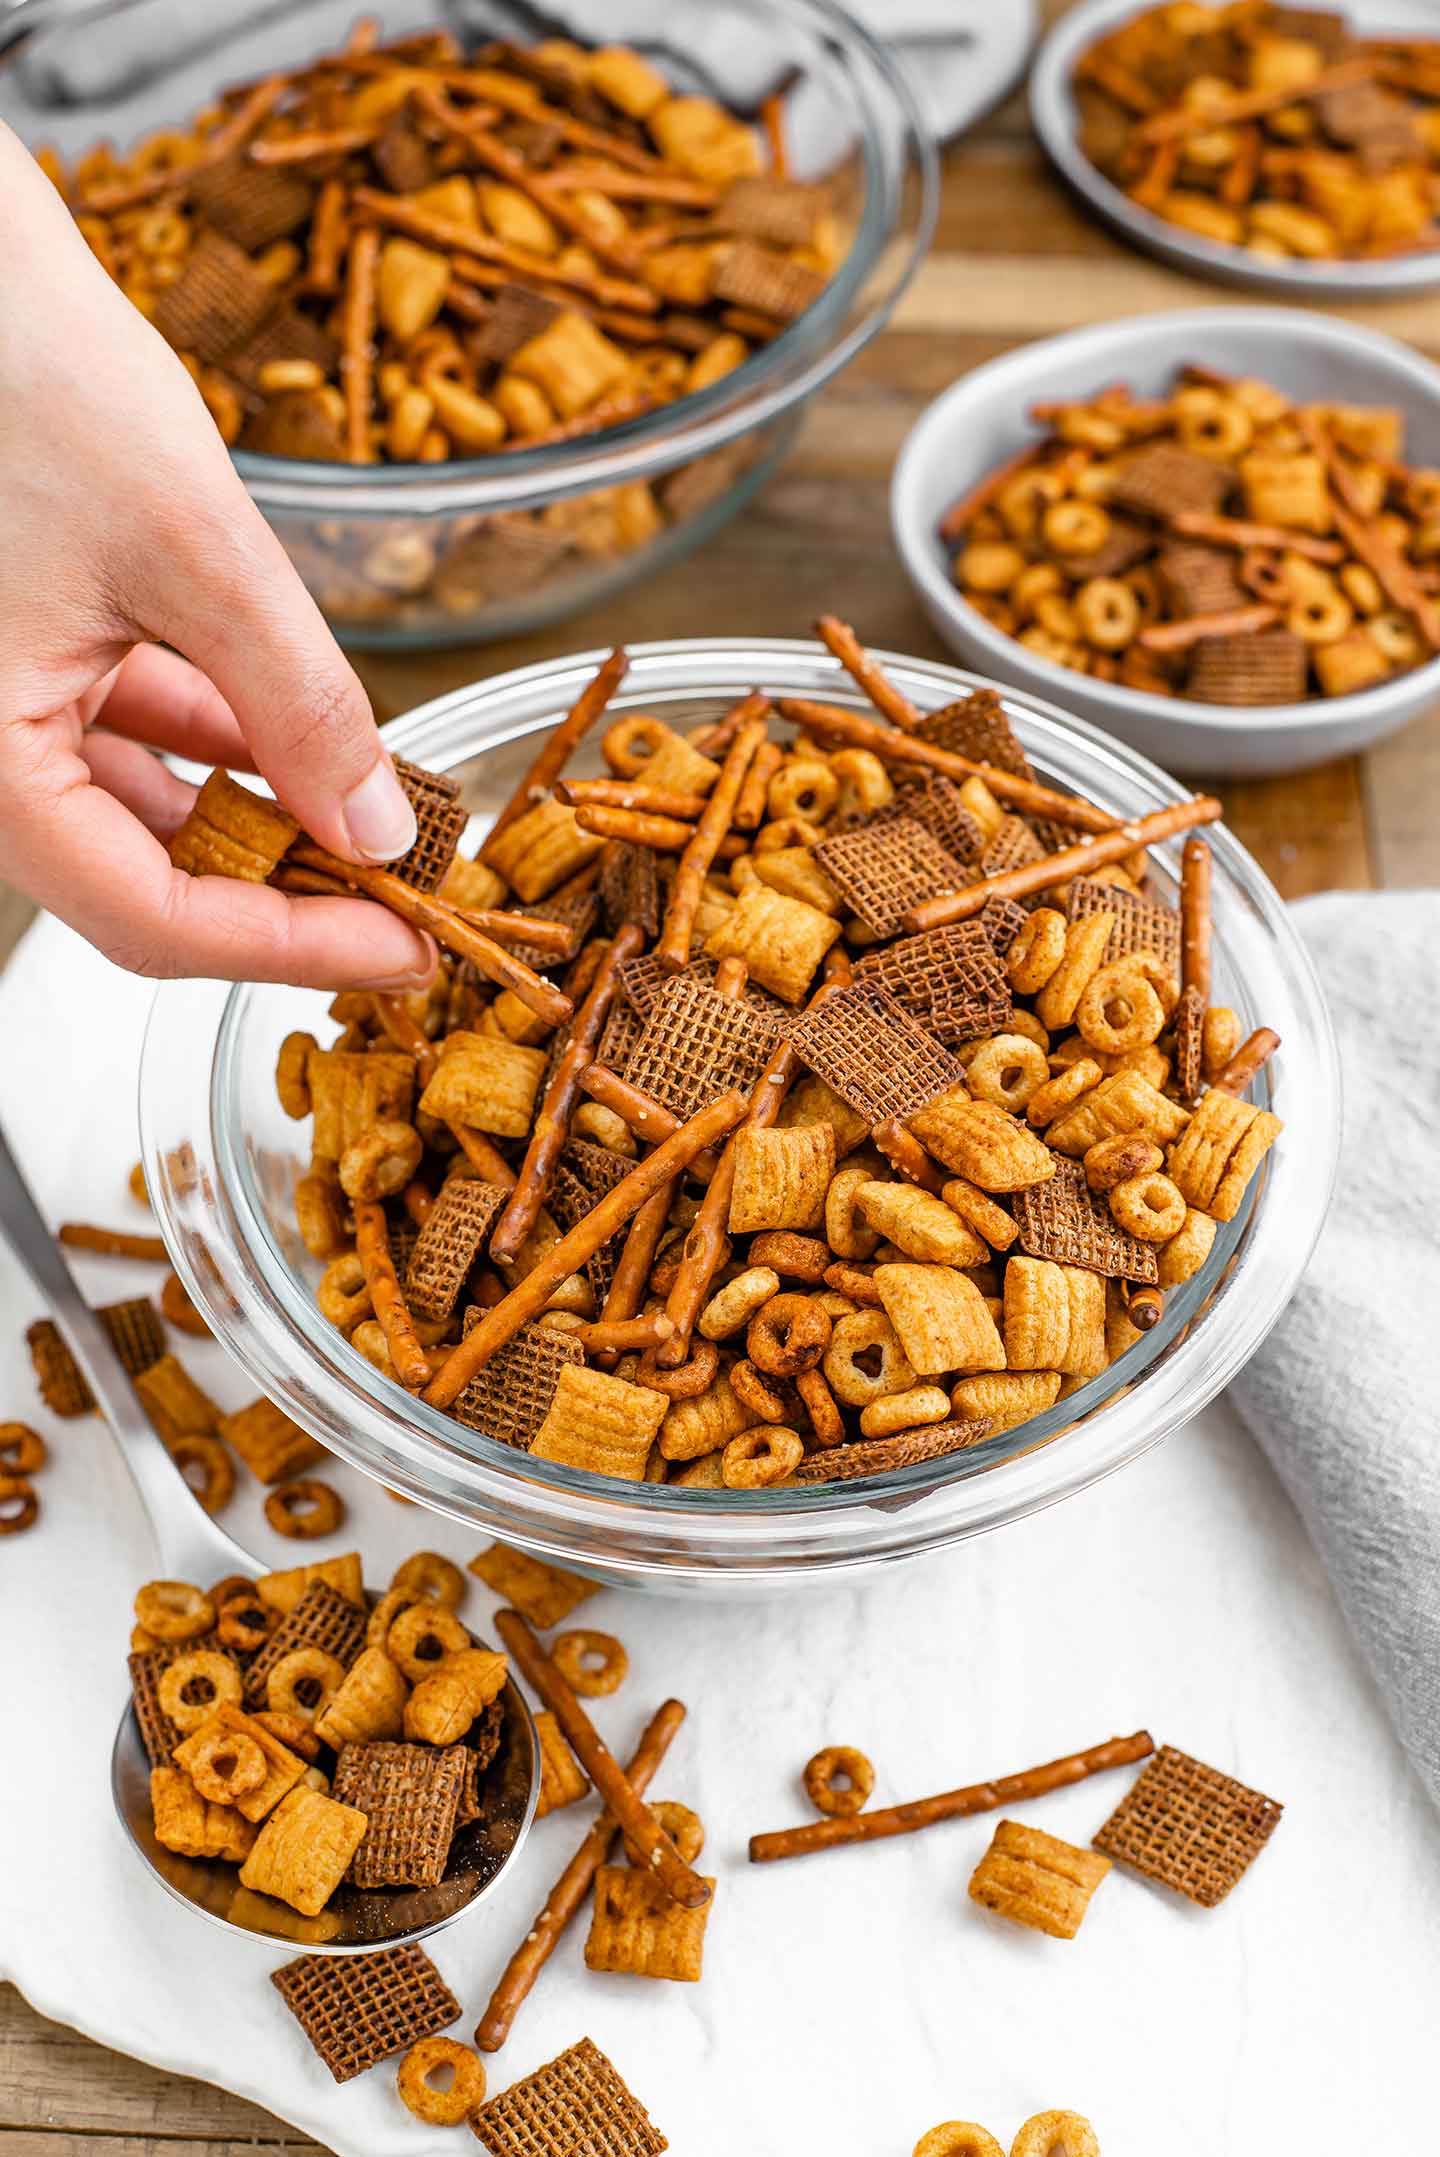 Side view of hand grabbing party mix from a large bowl of a spiced pretzel and cereal mixture. Smaller bowls of party mix are in the background.